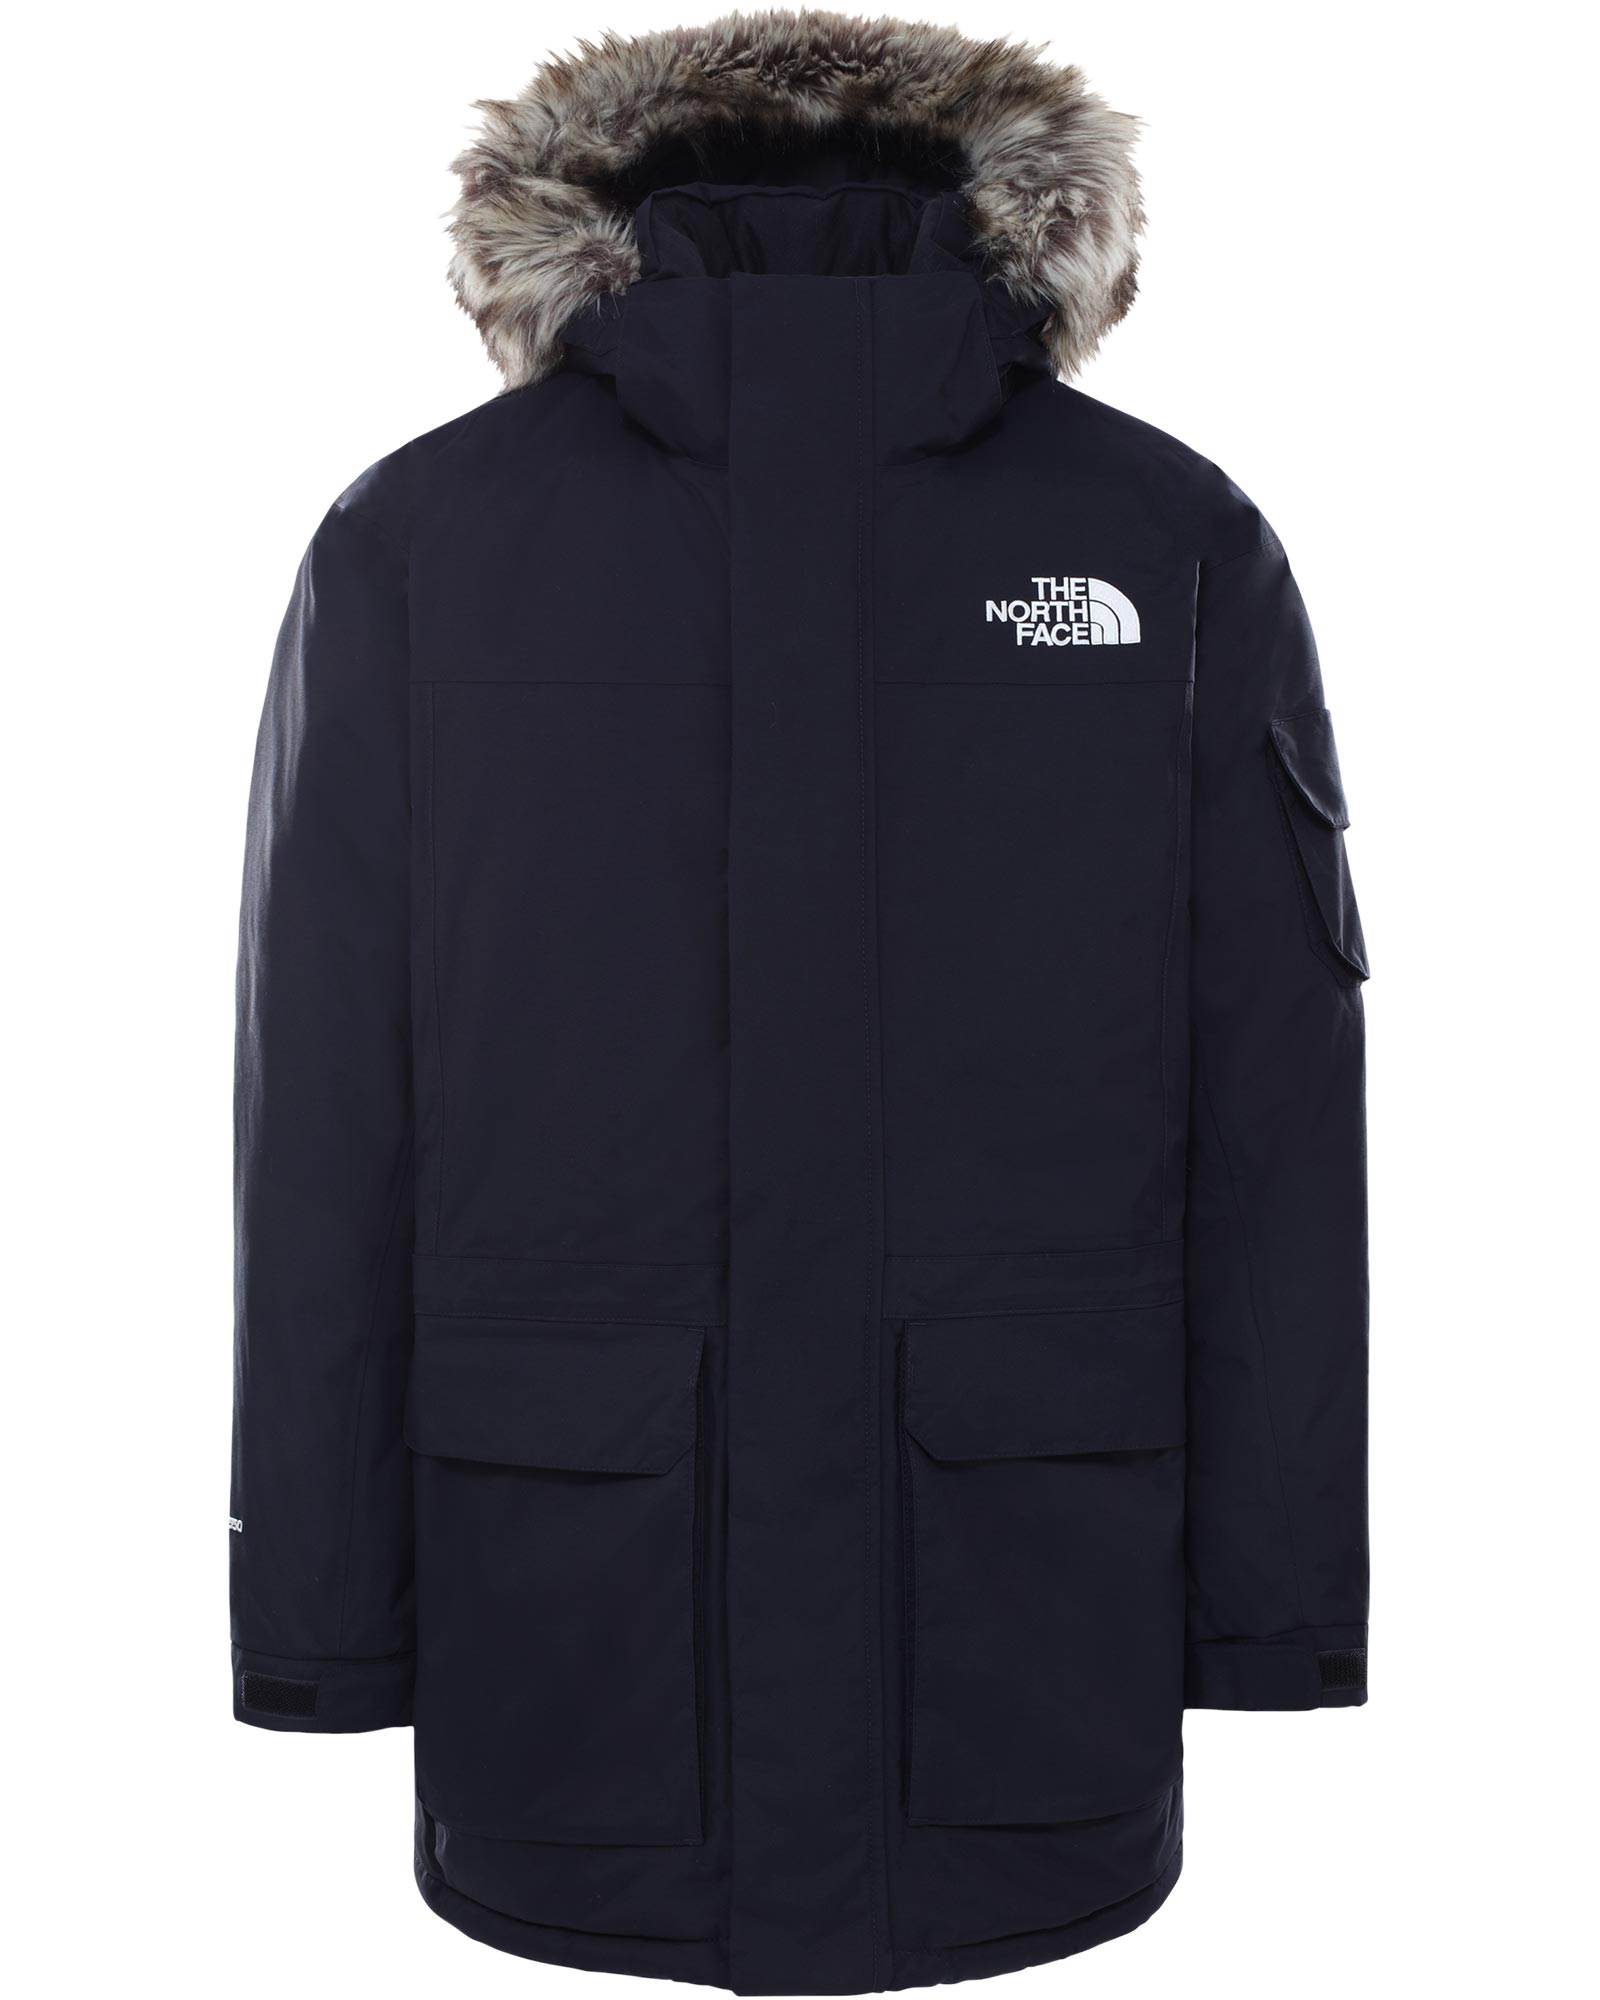 northern face coats